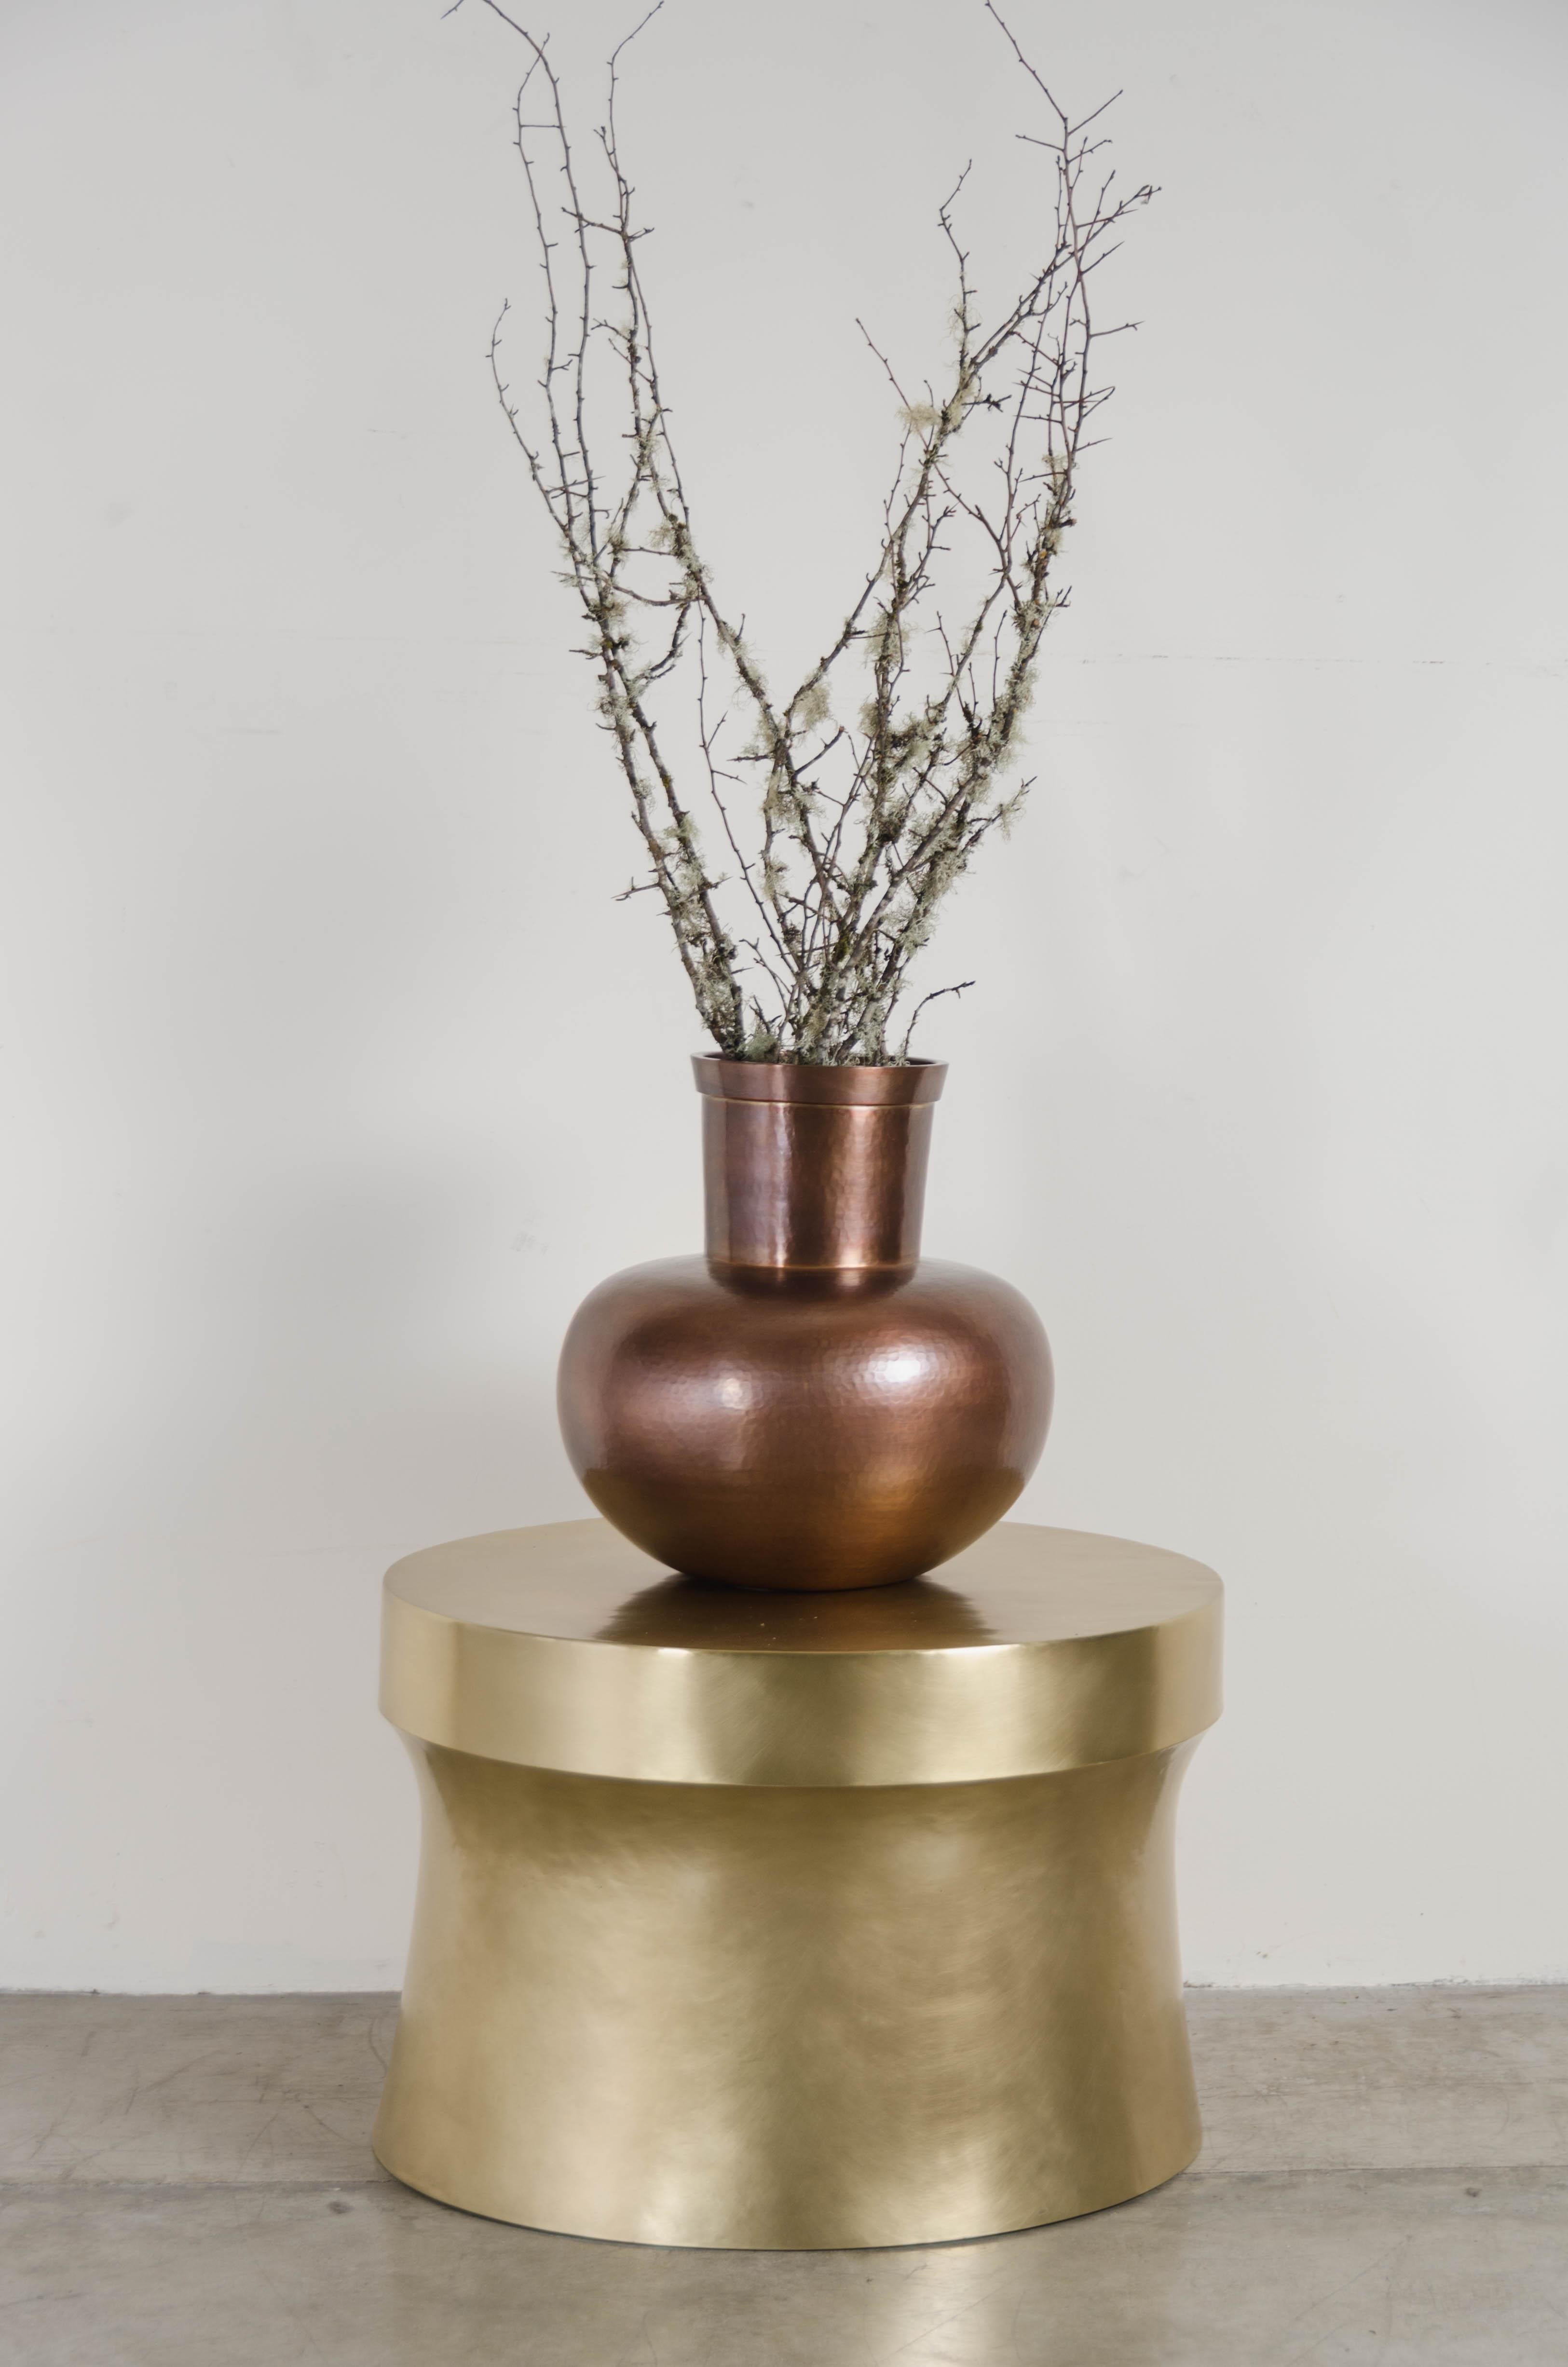 Repoussé Dong Shan Table, Brass by Robert Kuo, Hand Repousse, Limited Edition For Sale